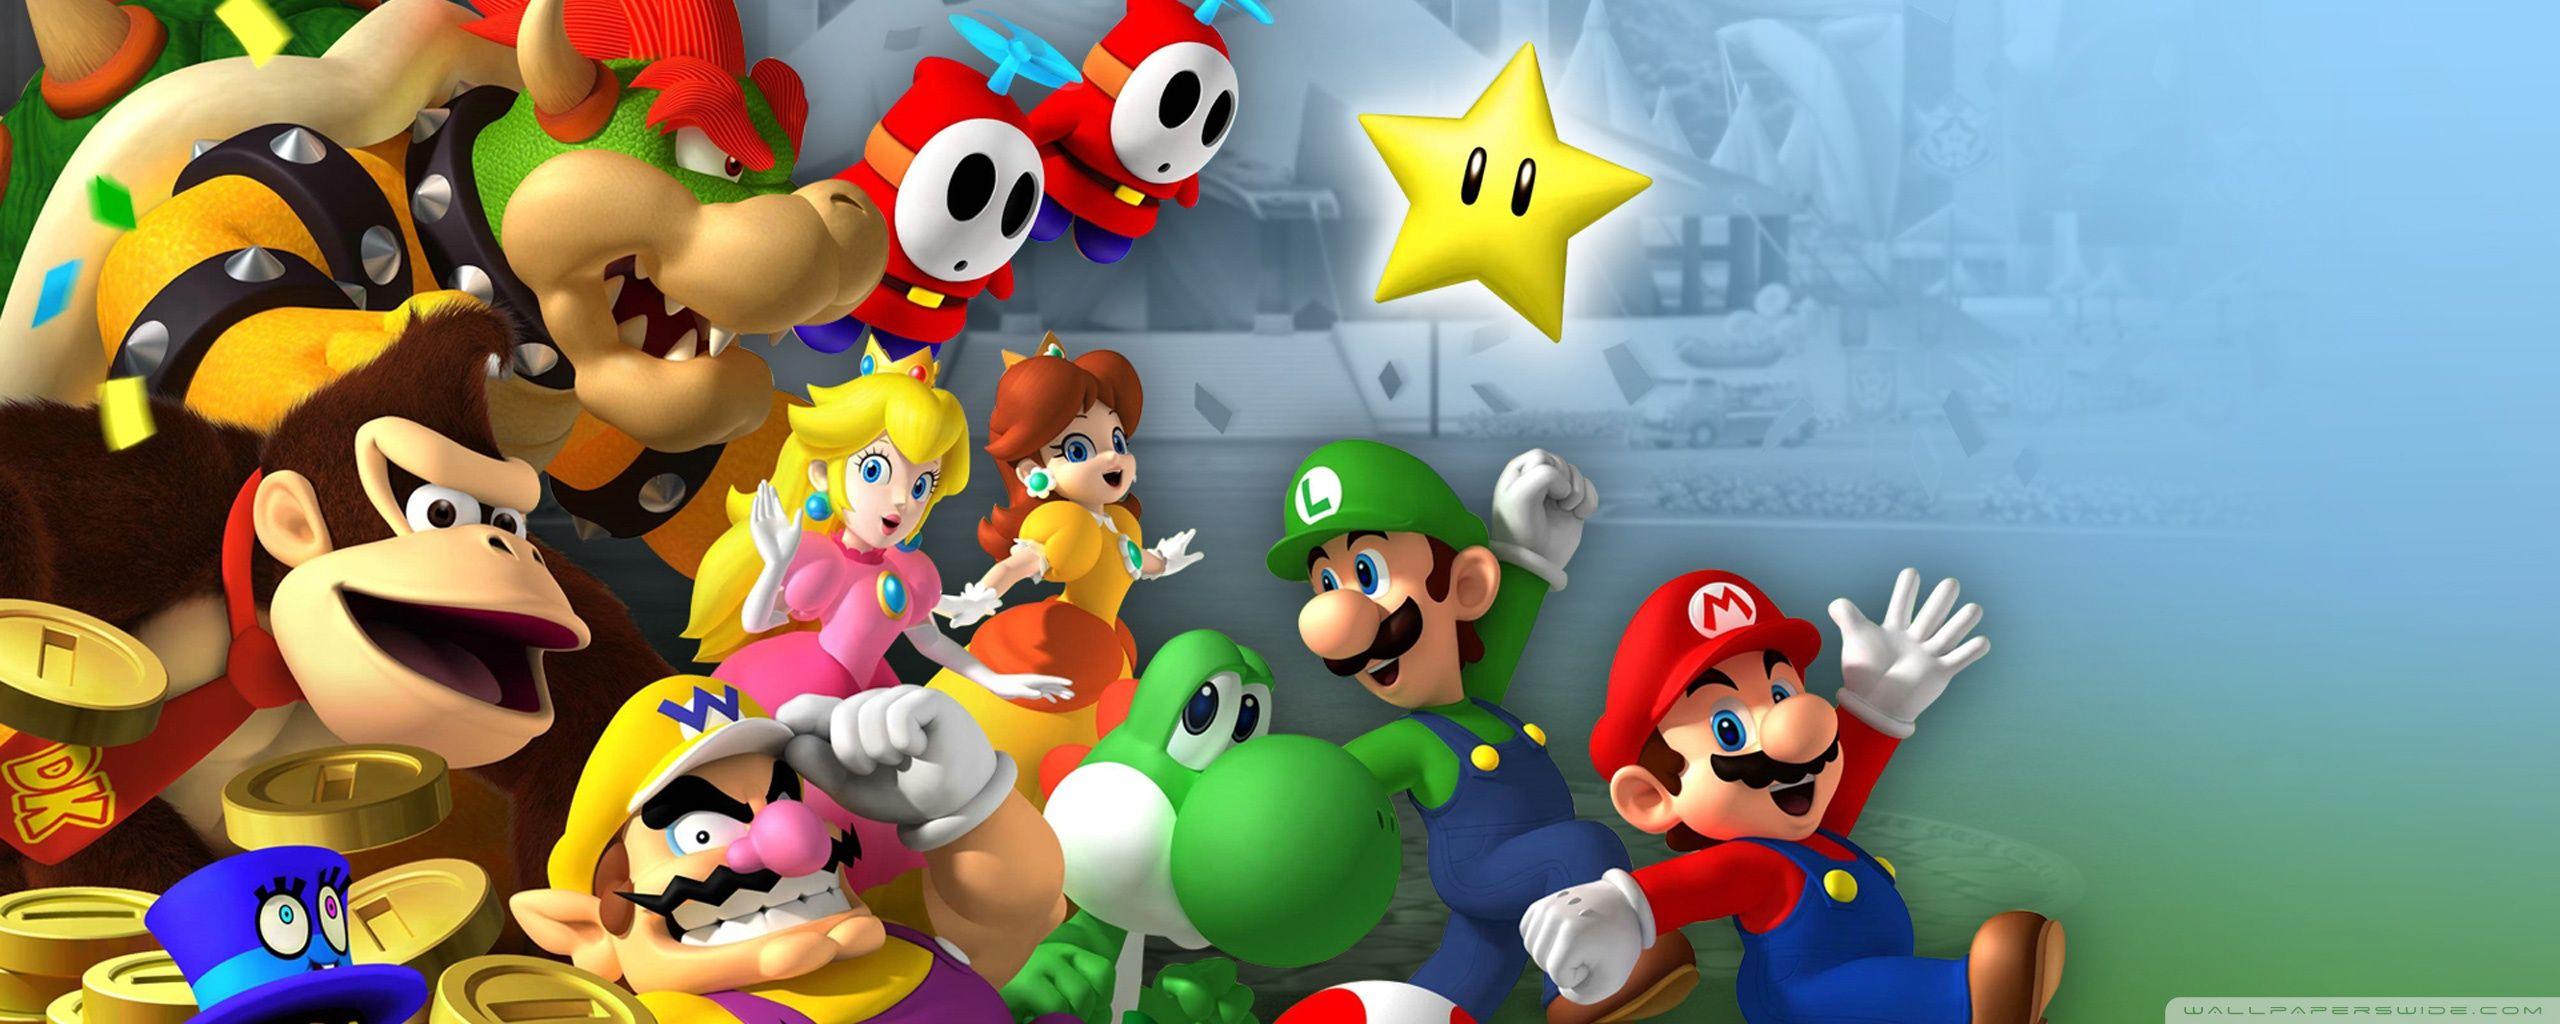 Mario Luigi And Others ❤ 4K HD Desktop Wallpaper for • Dual Monitor